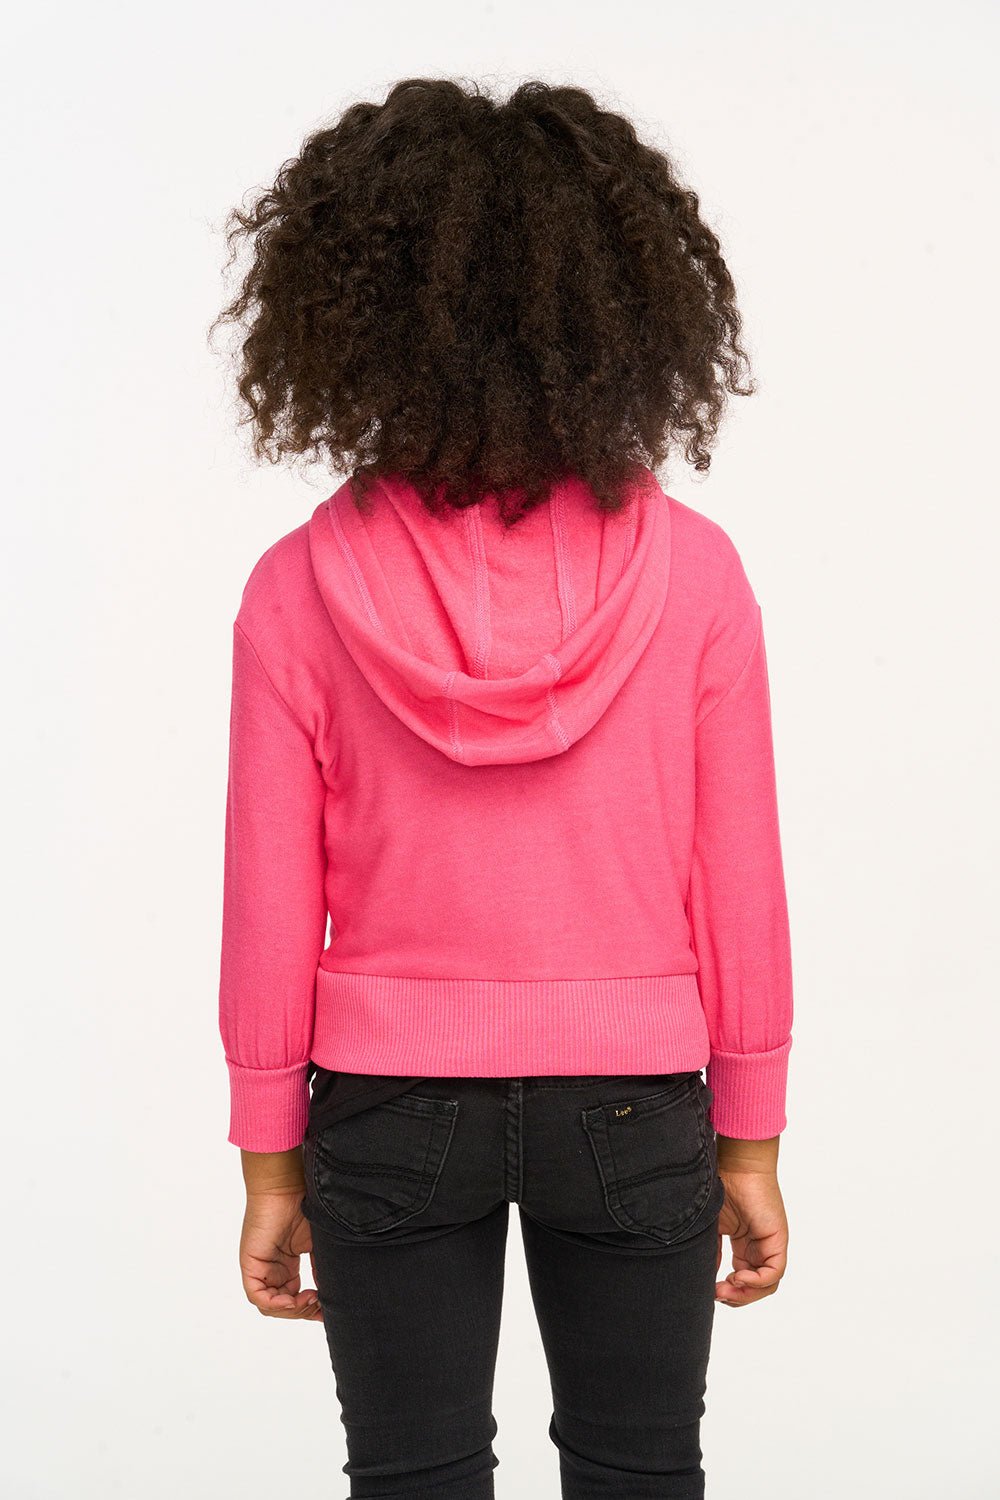 Chaser Puffy Cozy Zip Up in Flamingo Pink - Estilo Boutique